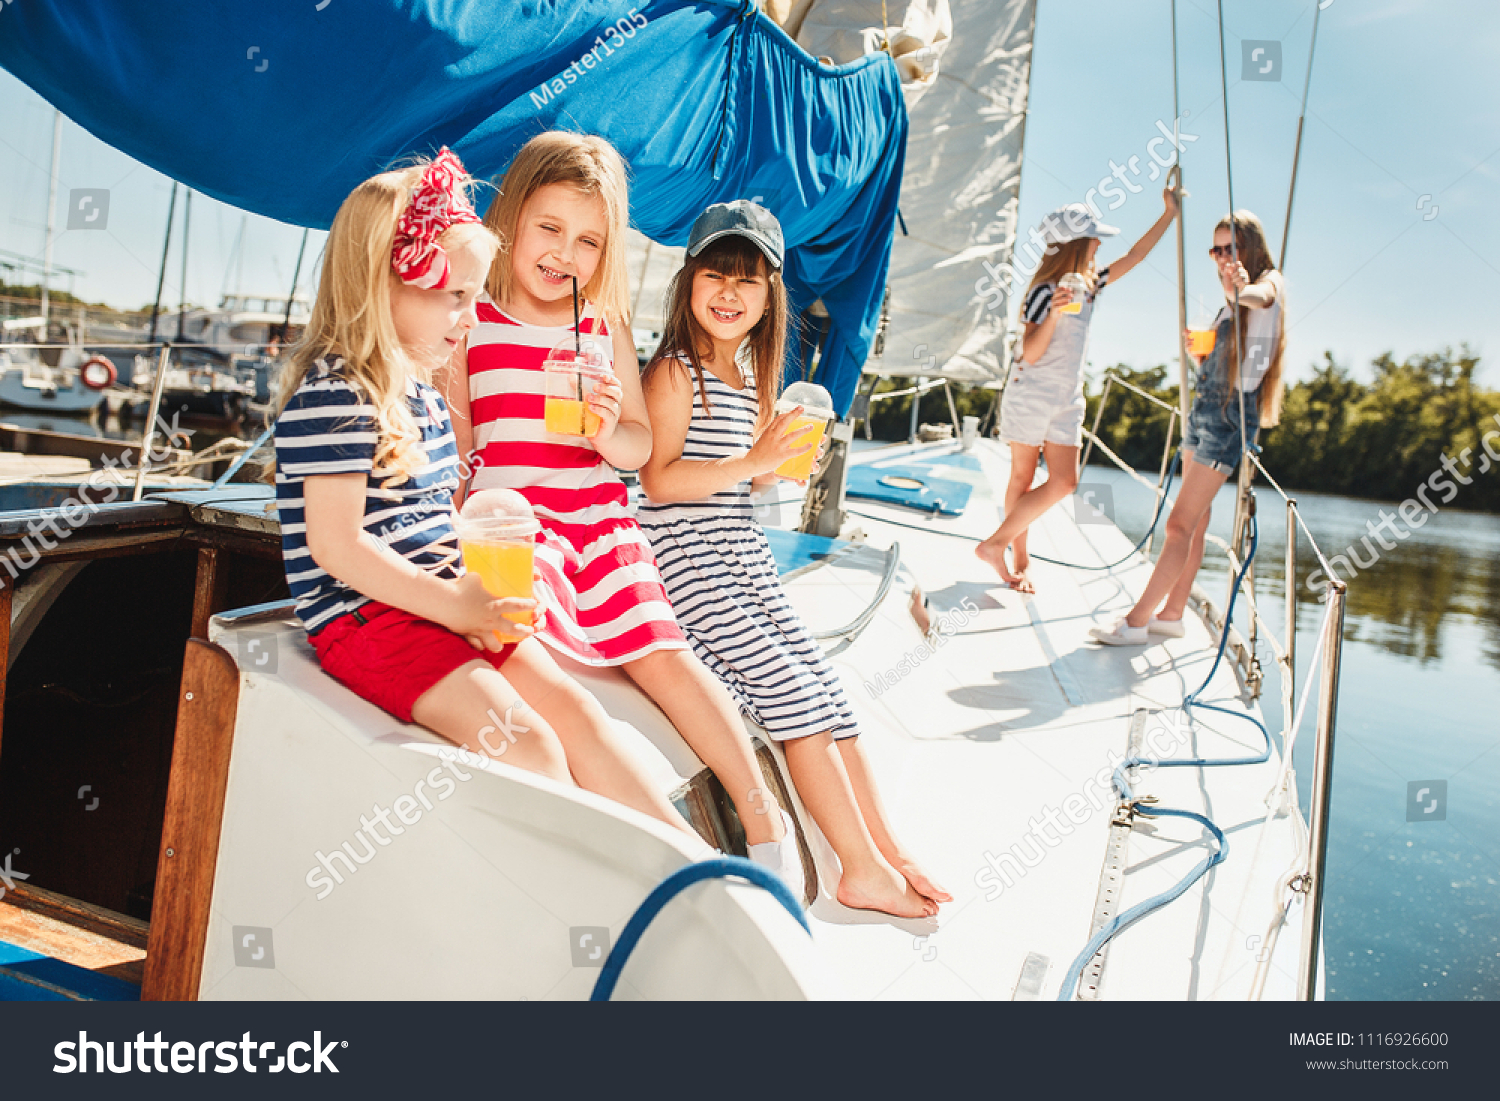 The children on board of sea yacht drinking orange juice. The teen or child girls against blue sky outdoor. Colorful clothes. Kids fashion, sunny summer, river and holidays concepts. #1116926600